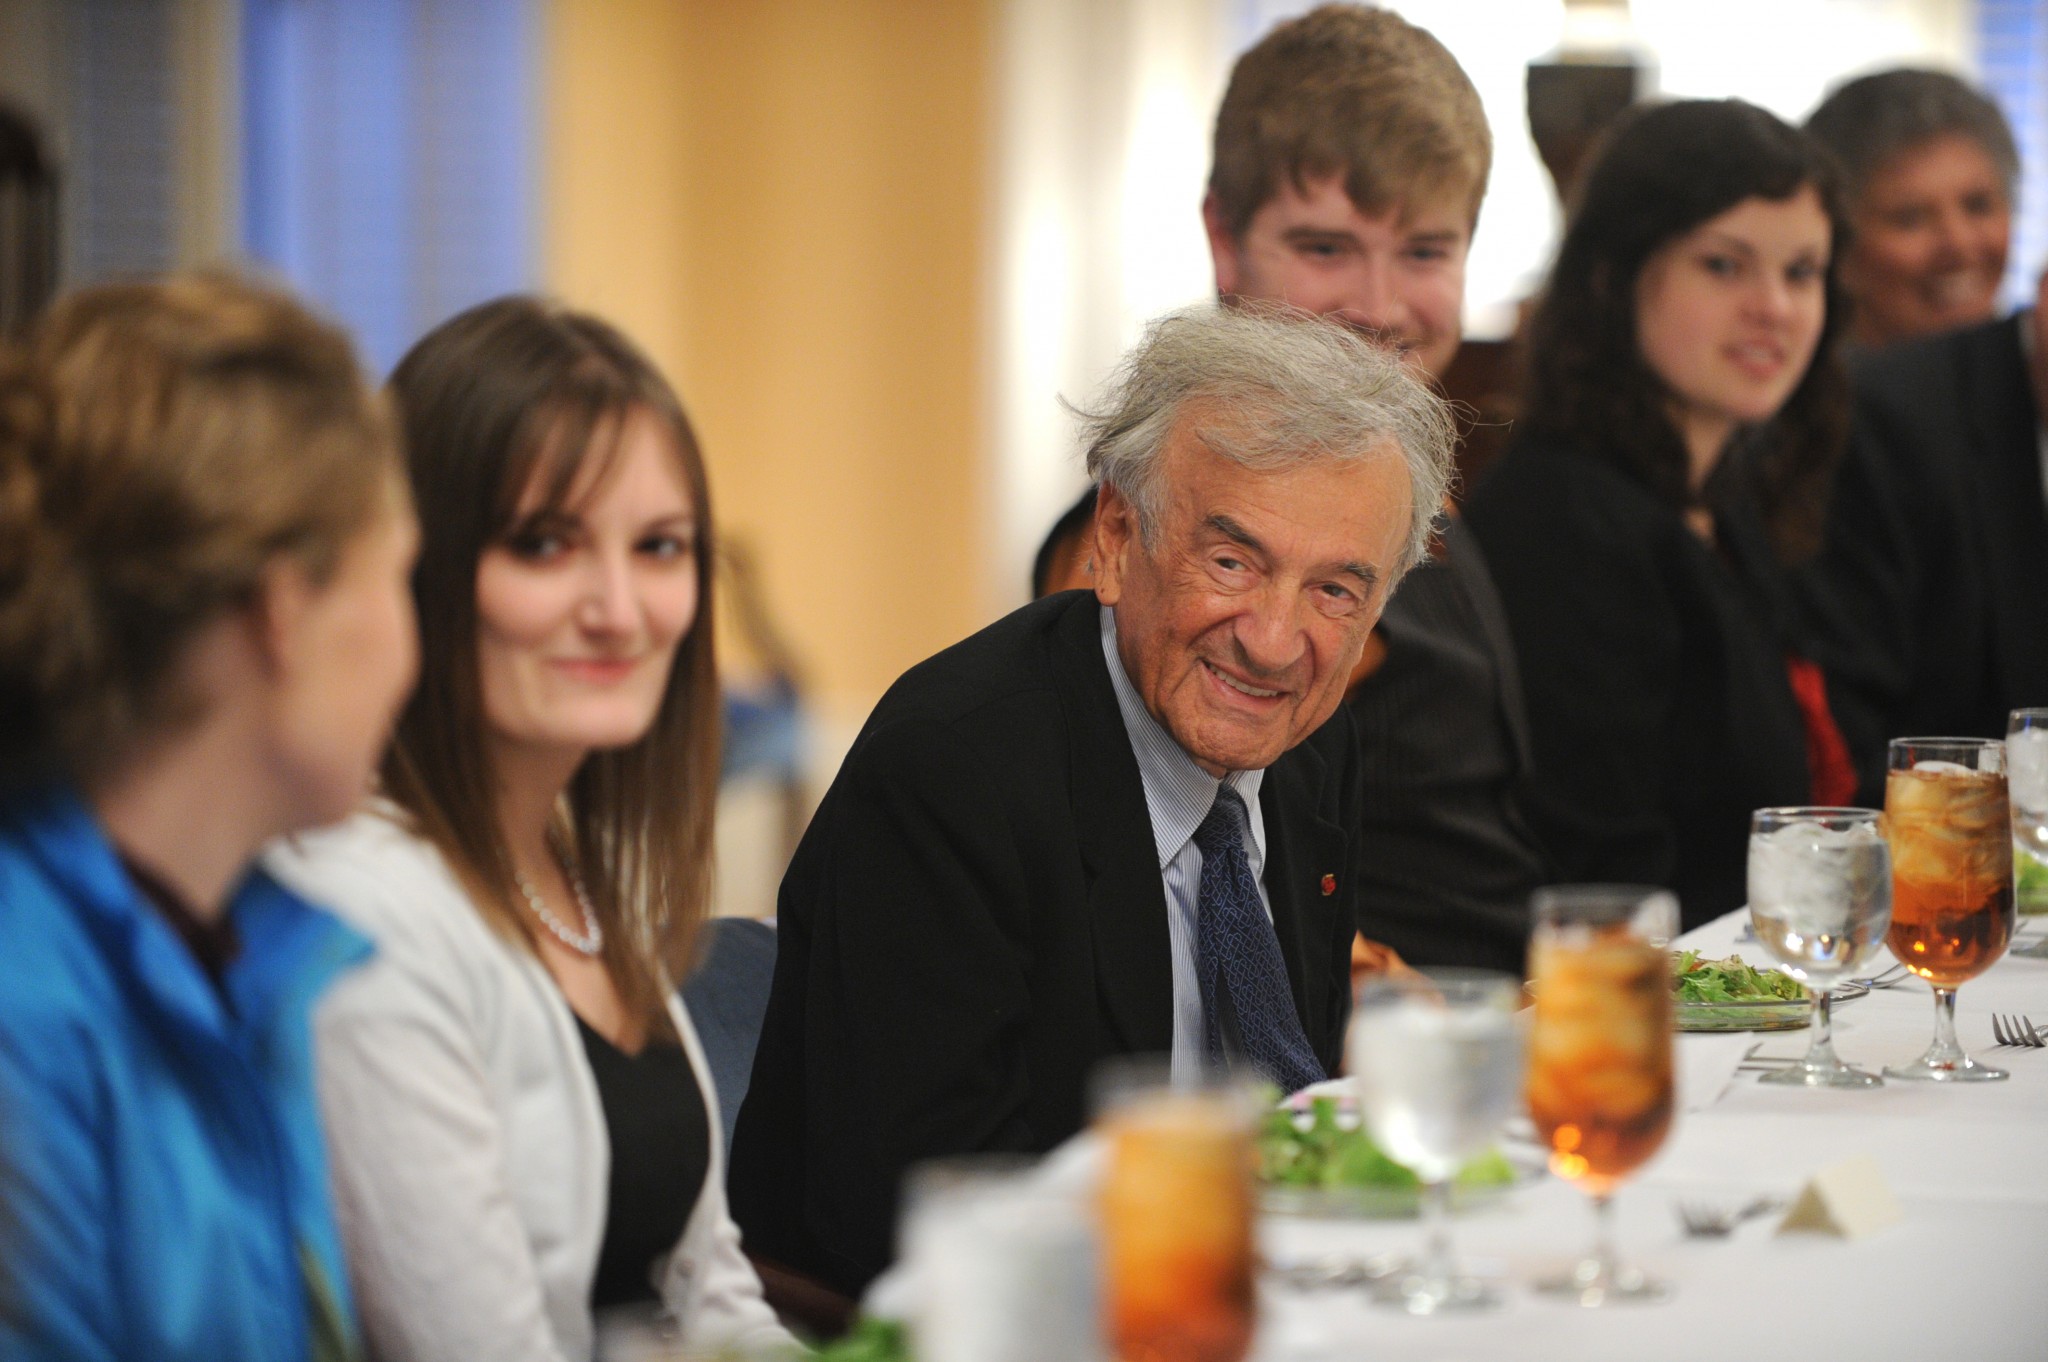 Professor and Nobel Laureate Elie Wiesel speaks with students of the University of Mississippi at a dinner in his honor Monday, Feb. 8, 2010 at The Lyceum. Professor Wiesel is on campus to deliver The Sally McDonnell Barksdale Honors College Spring Convocation Lecture at the Gertrude C. Ford Center for the Performing Arts. Photo by Nathan Latil, UM Brand Photography